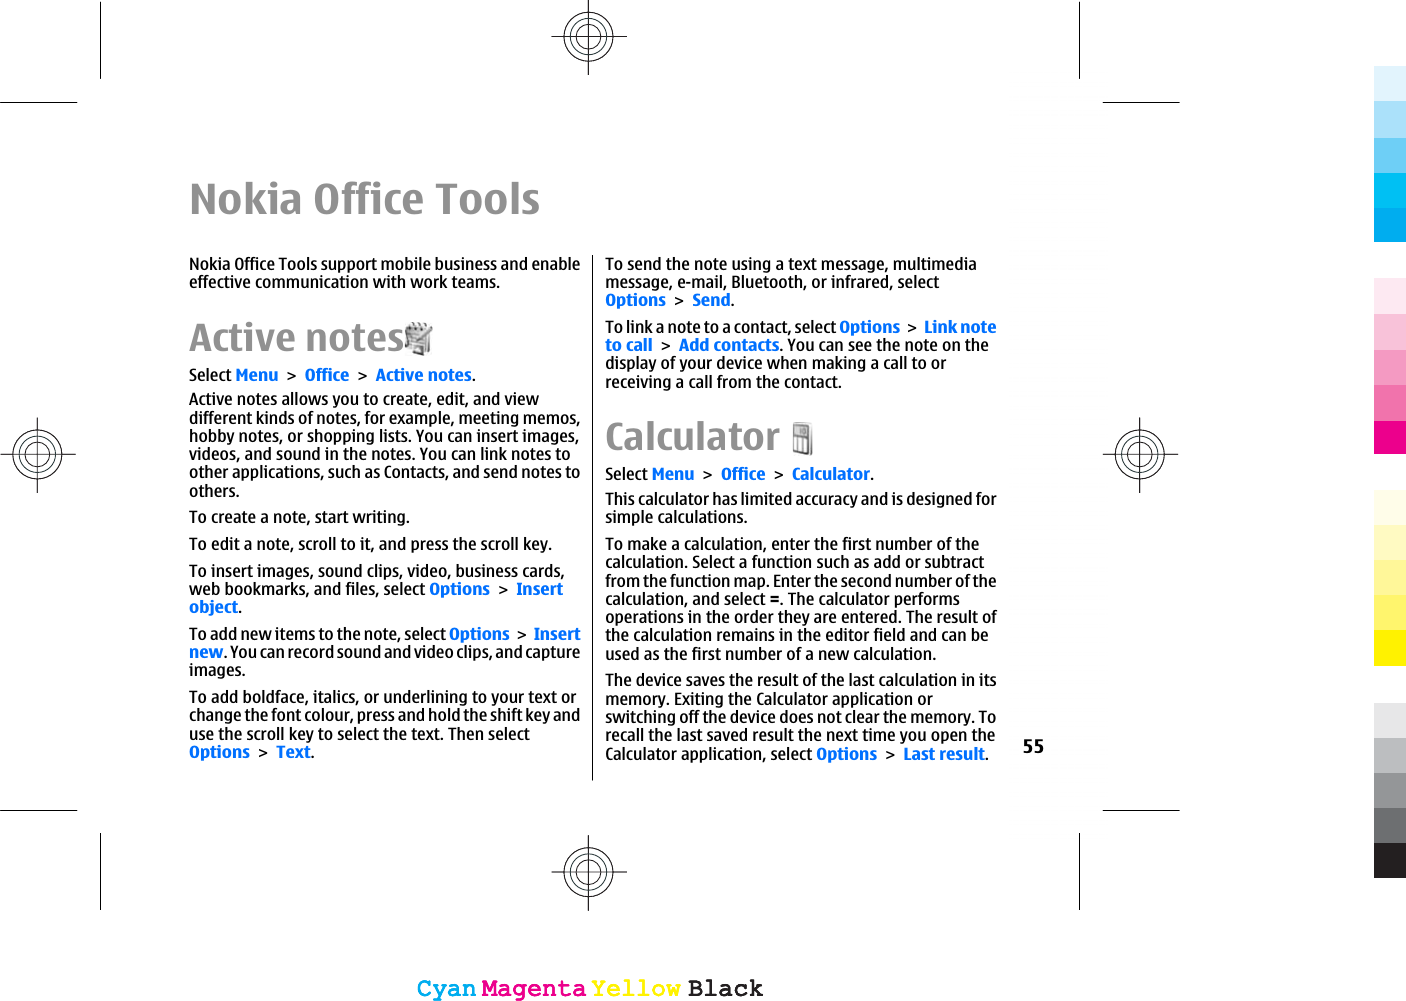 Nokia Office ToolsNokia Office Tools support mobile business and enableeffective communication with work teams.Active notesSelect MenuOfficeActive notes.Active notes allows you to create, edit, and viewdifferent kinds of notes, for example, meeting memos,hobby notes, or shopping lists. You can insert images,videos, and sound in the notes. You can link notes toother applications, such as Contacts, and send notes toothers.To create a note, start writing.To edit a note, scroll to it, and press the scroll key.To insert images, sound clips, video, business cards,web bookmarks, and files, select OptionsInsertobject.To add new items to the note, select OptionsInsertnew. You can record sound and video clips, and captureimages.To add boldface, italics, or underlining to your text orchange the font colour, press and hold the shift key anduse the scroll key to select the text. Then selectOptionsText.To send the note using a text message, multimediamessage, e-mail, Bluetooth, or infrared, selectOptionsSend.To link a note to a contact, select OptionsLink noteto callAdd contacts. You can see the note on thedisplay of your device when making a call to orreceiving a call from the contact.CalculatorSelect MenuOfficeCalculator.This calculator has limited accuracy and is designed forsimple calculations.To make a calculation, enter the first number of thecalculation. Select a function such as add or subtractfrom the function map. Enter the second number of thecalculation, and select =. The calculator performsoperations in the order they are entered. The result ofthe calculation remains in the editor field and can beused as the first number of a new calculation.The device saves the result of the last calculation in itsmemory. Exiting the Calculator application orswitching off the device does not clear the memory. Torecall the last saved result the next time you open theCalculator application, select OptionsLast result.55CyanCyanMagentaMagentaYellowYellowBlackBlackCyanCyanMagentaMagentaYellowYellowBlackBlack